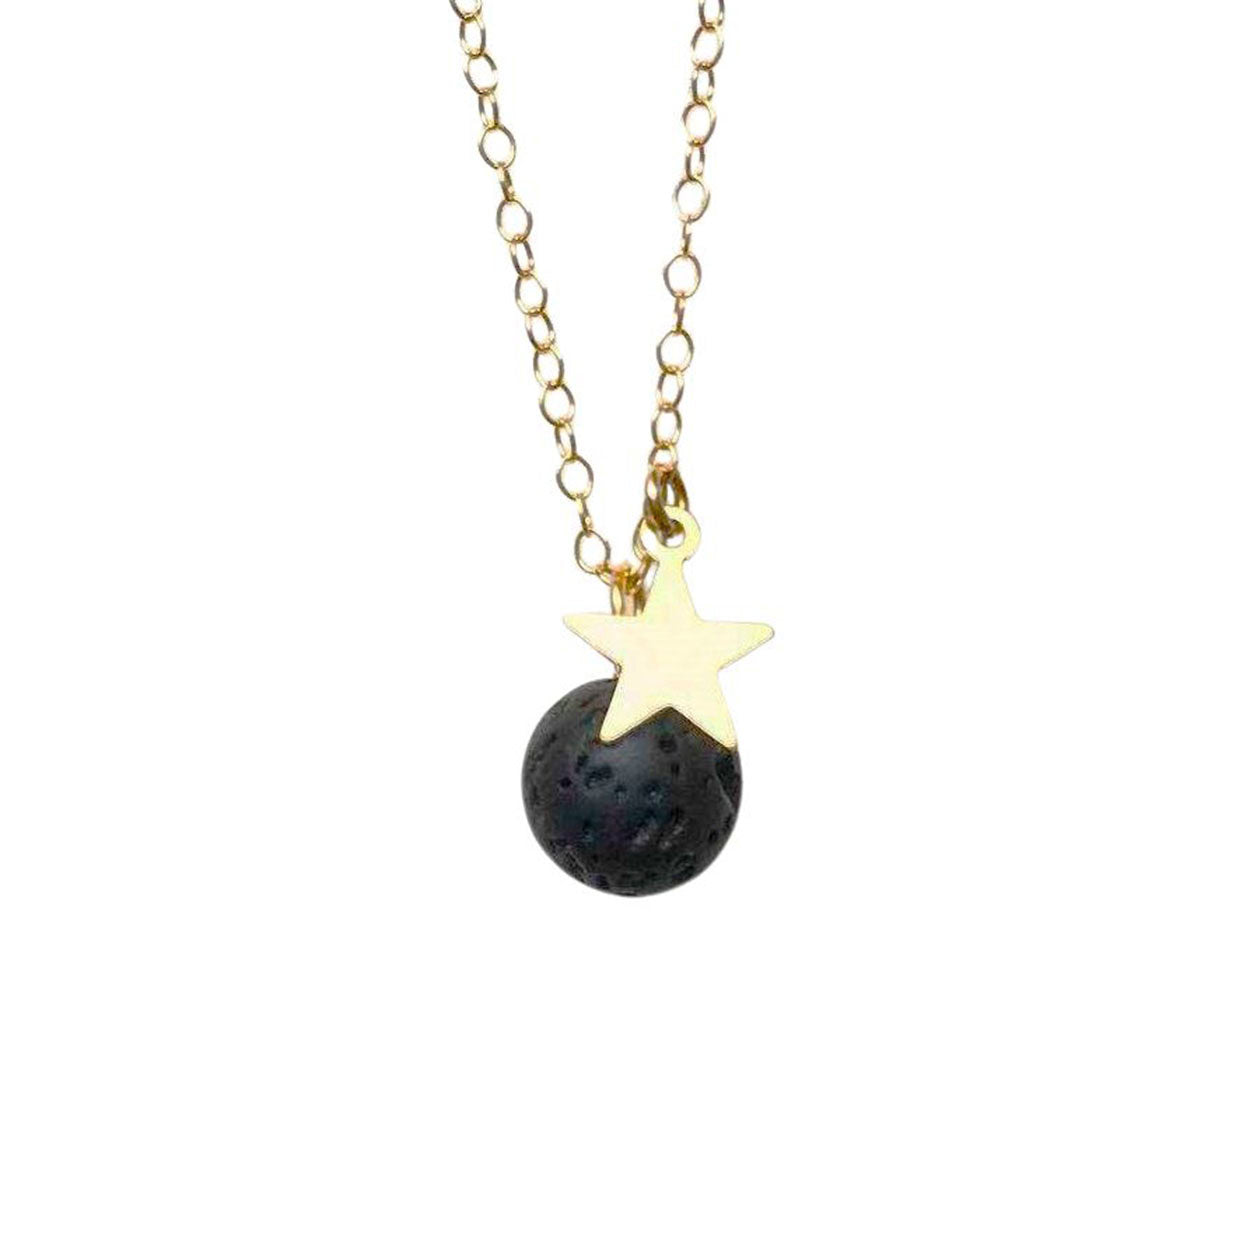 A round lava stone and gold star pendant attached to a gold chain